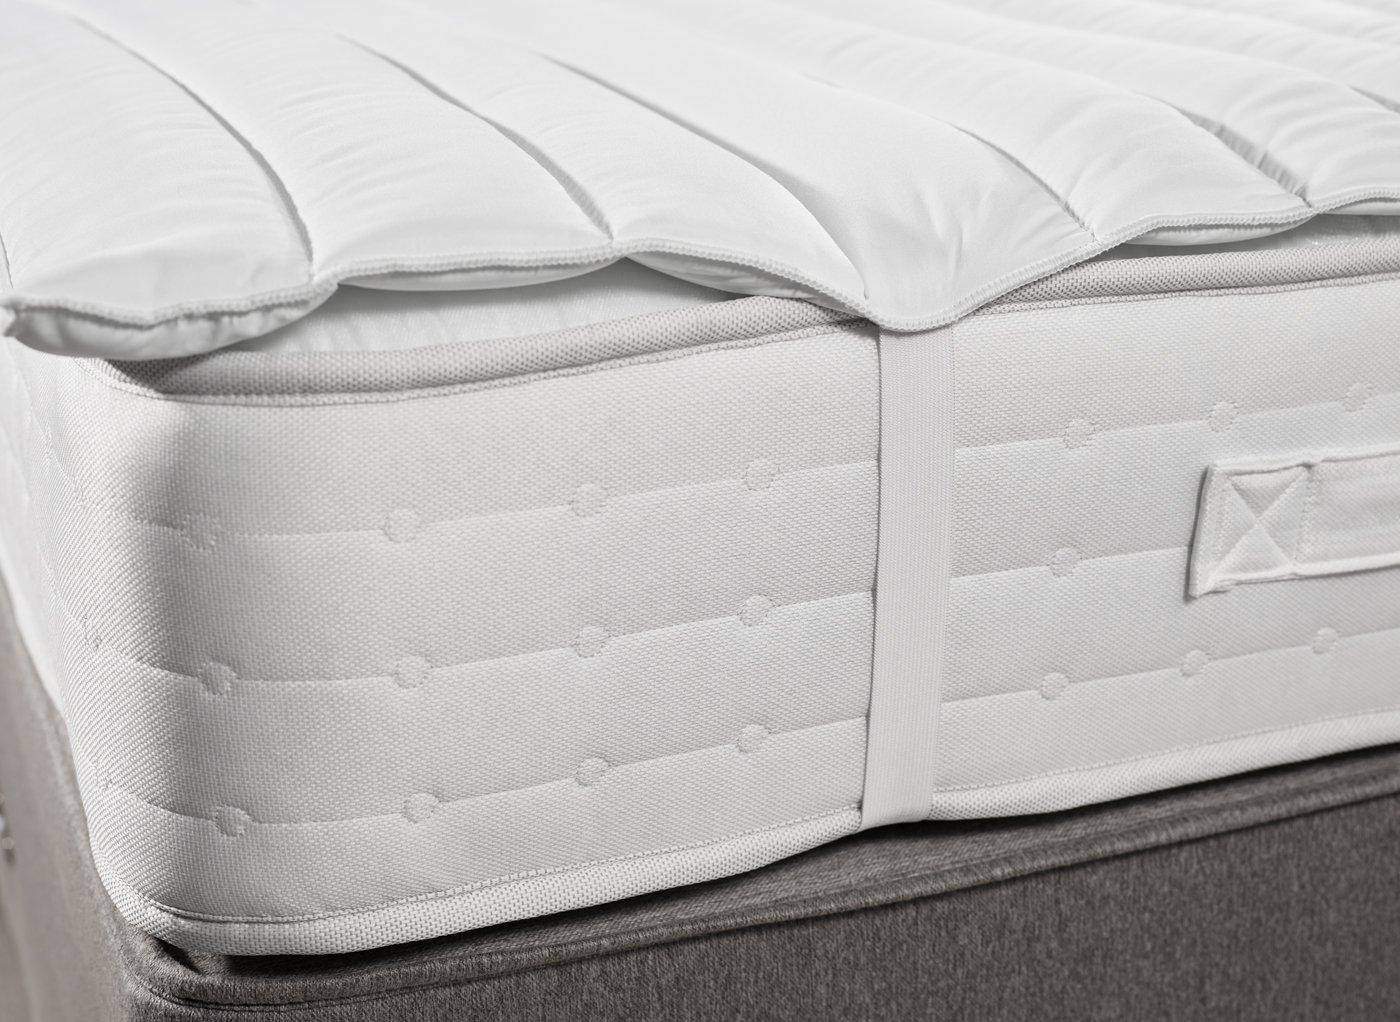 anti allergy mattress protector reviews